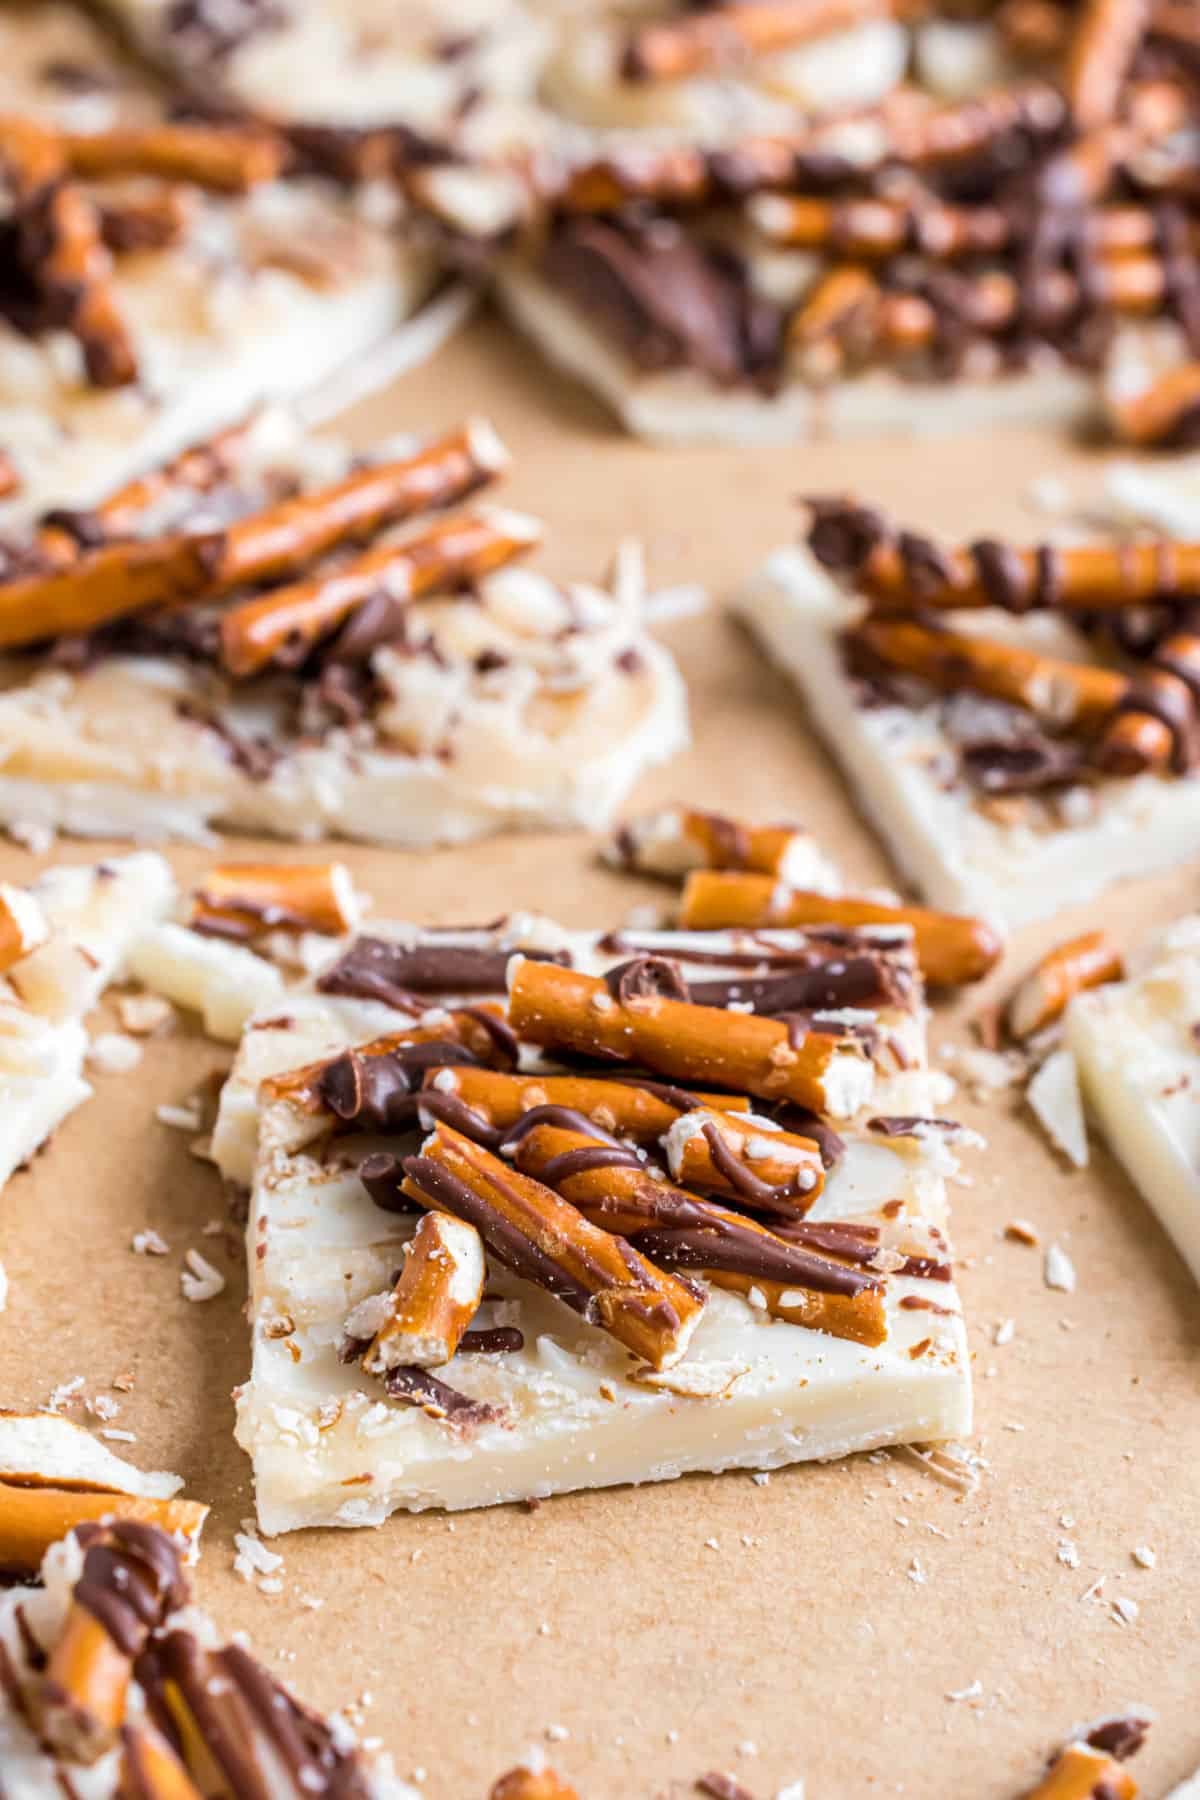 Pieces of salted caramel white chocolate candy topped with pretzels and milk chocolate.